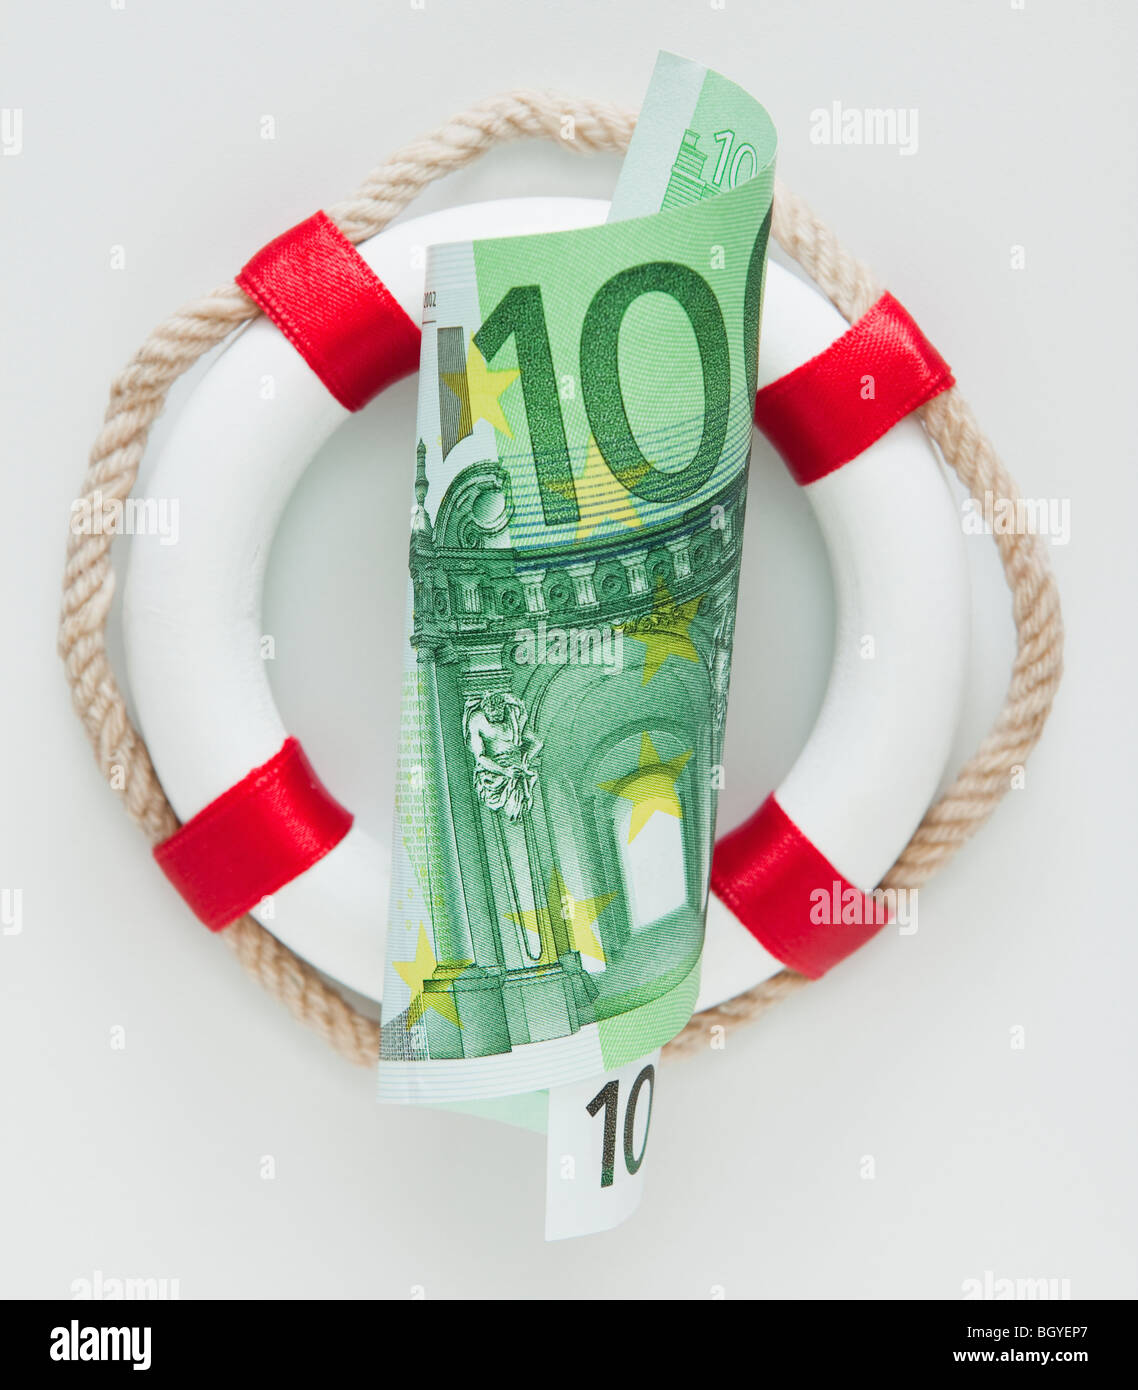 Ring bouy behind European currency Stock Photo